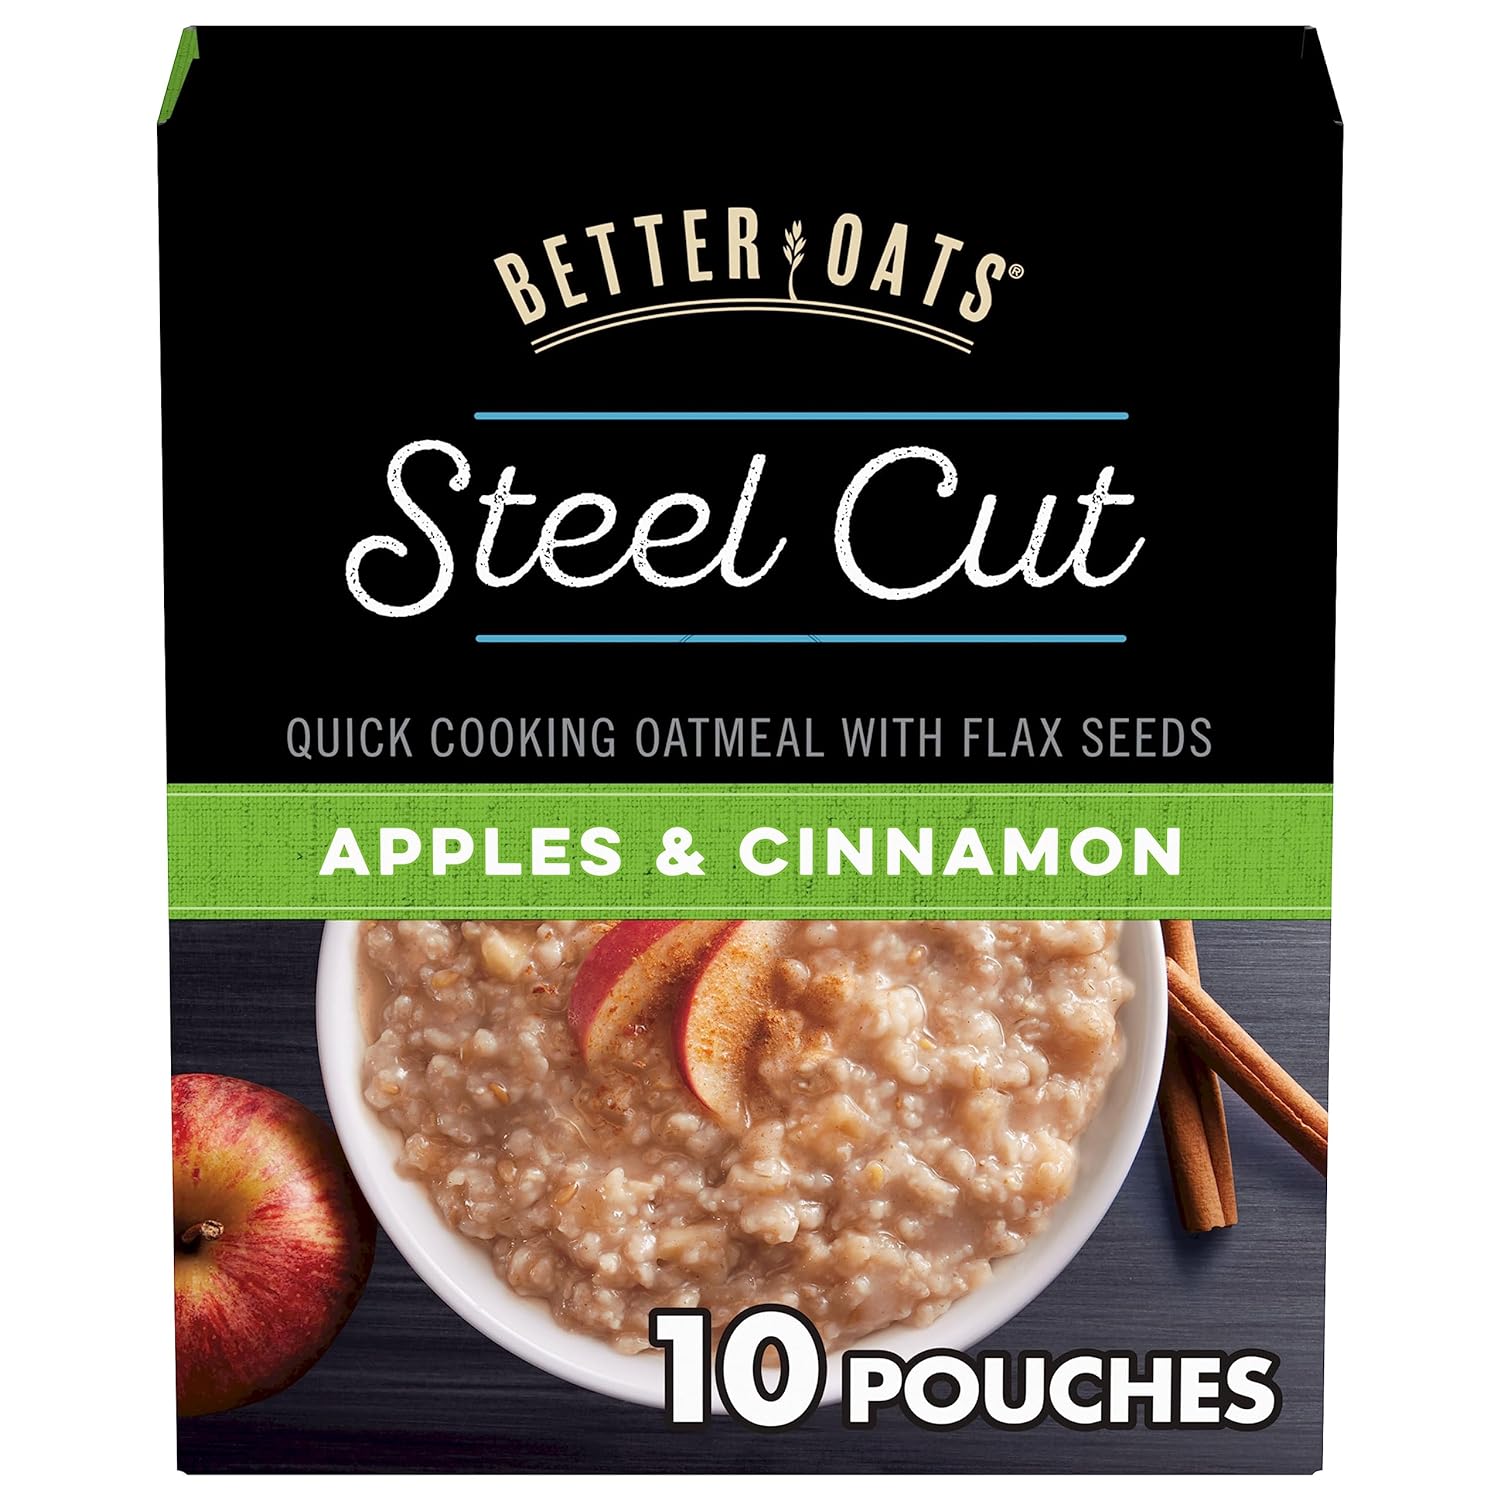 Better Oats Steel Cut Apples and Cinnamon Oatmeal Packets, Instant Steel Cut Oatmeal with Flax Seeds and Steel Cut Oats, Quick Oatmeal Pouches Ready in 2.5 Minutes, Pack of 6, 12.3 OZ Pack